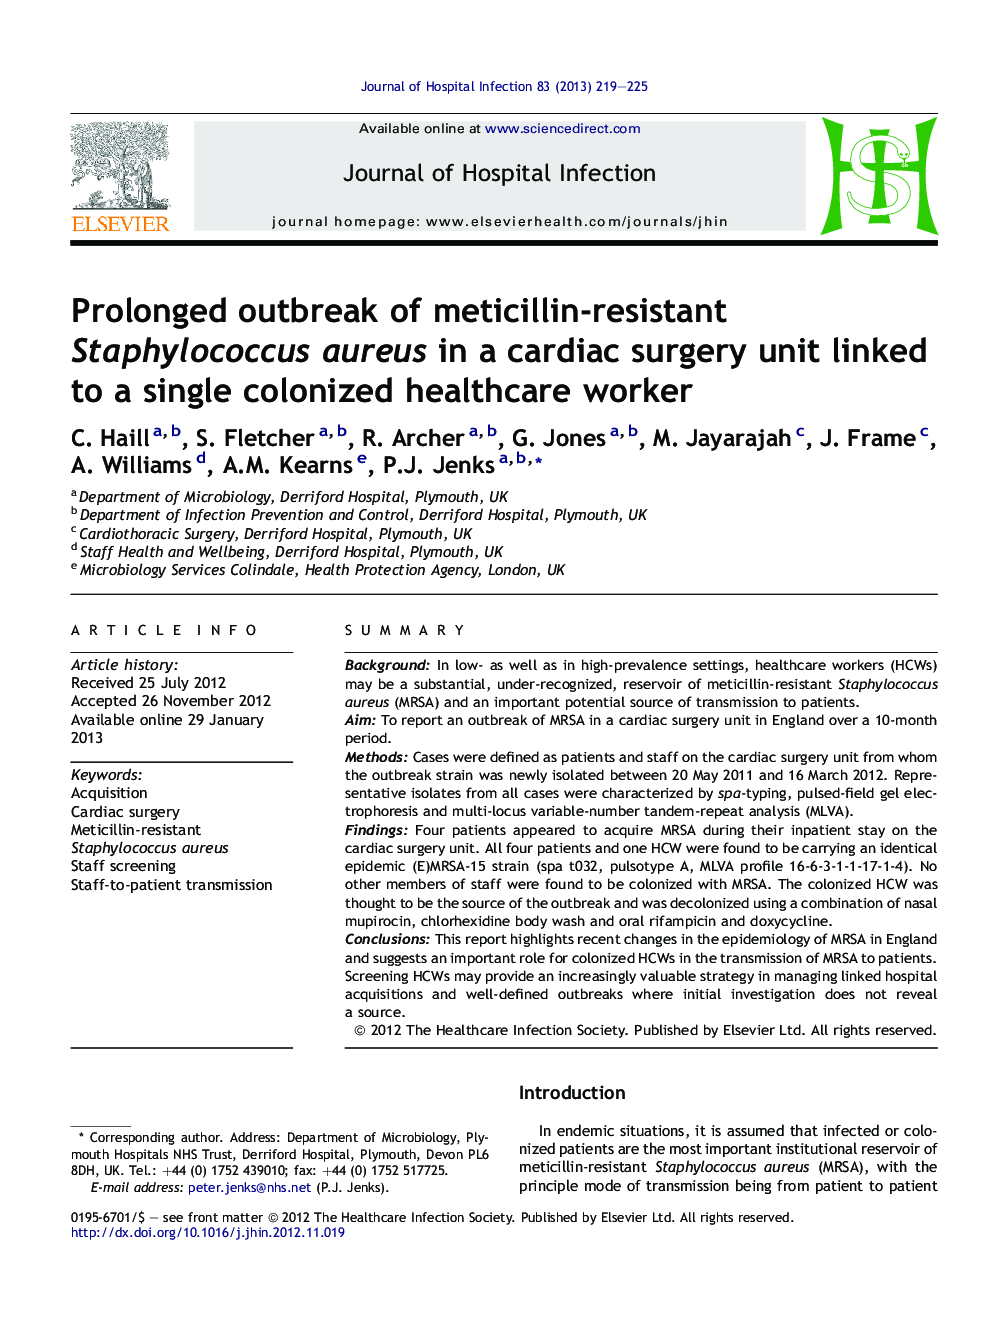 Prolonged outbreak of meticillin-resistant Staphylococcus aureus in a cardiac surgery unit linked to a single colonized healthcare worker